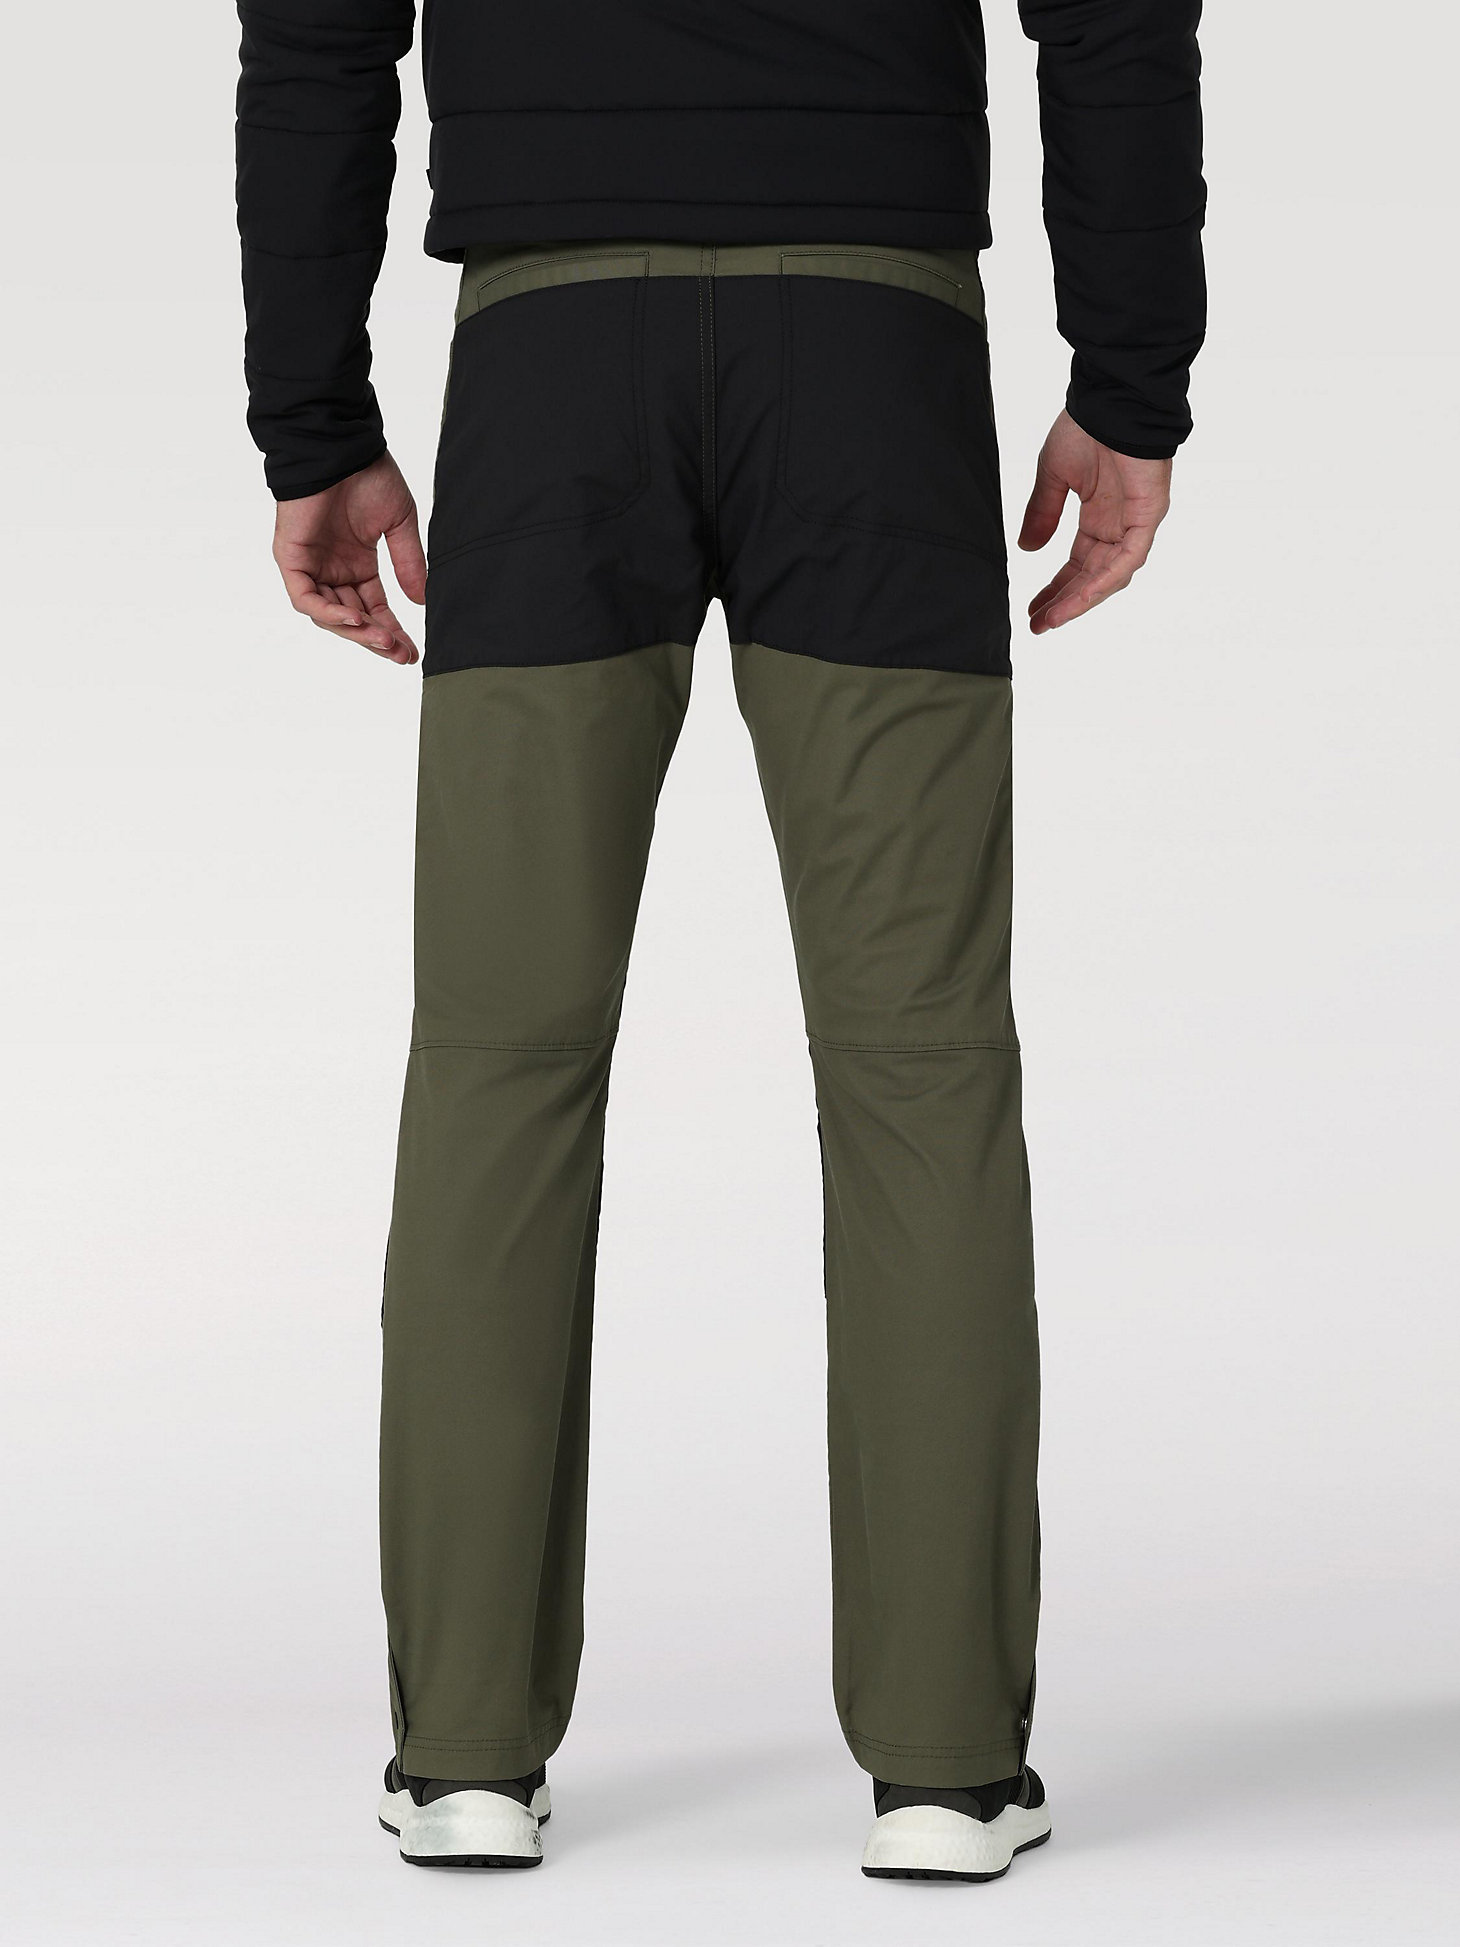 Reinforced Softshell Pant in Dusty Olive alternative view 2